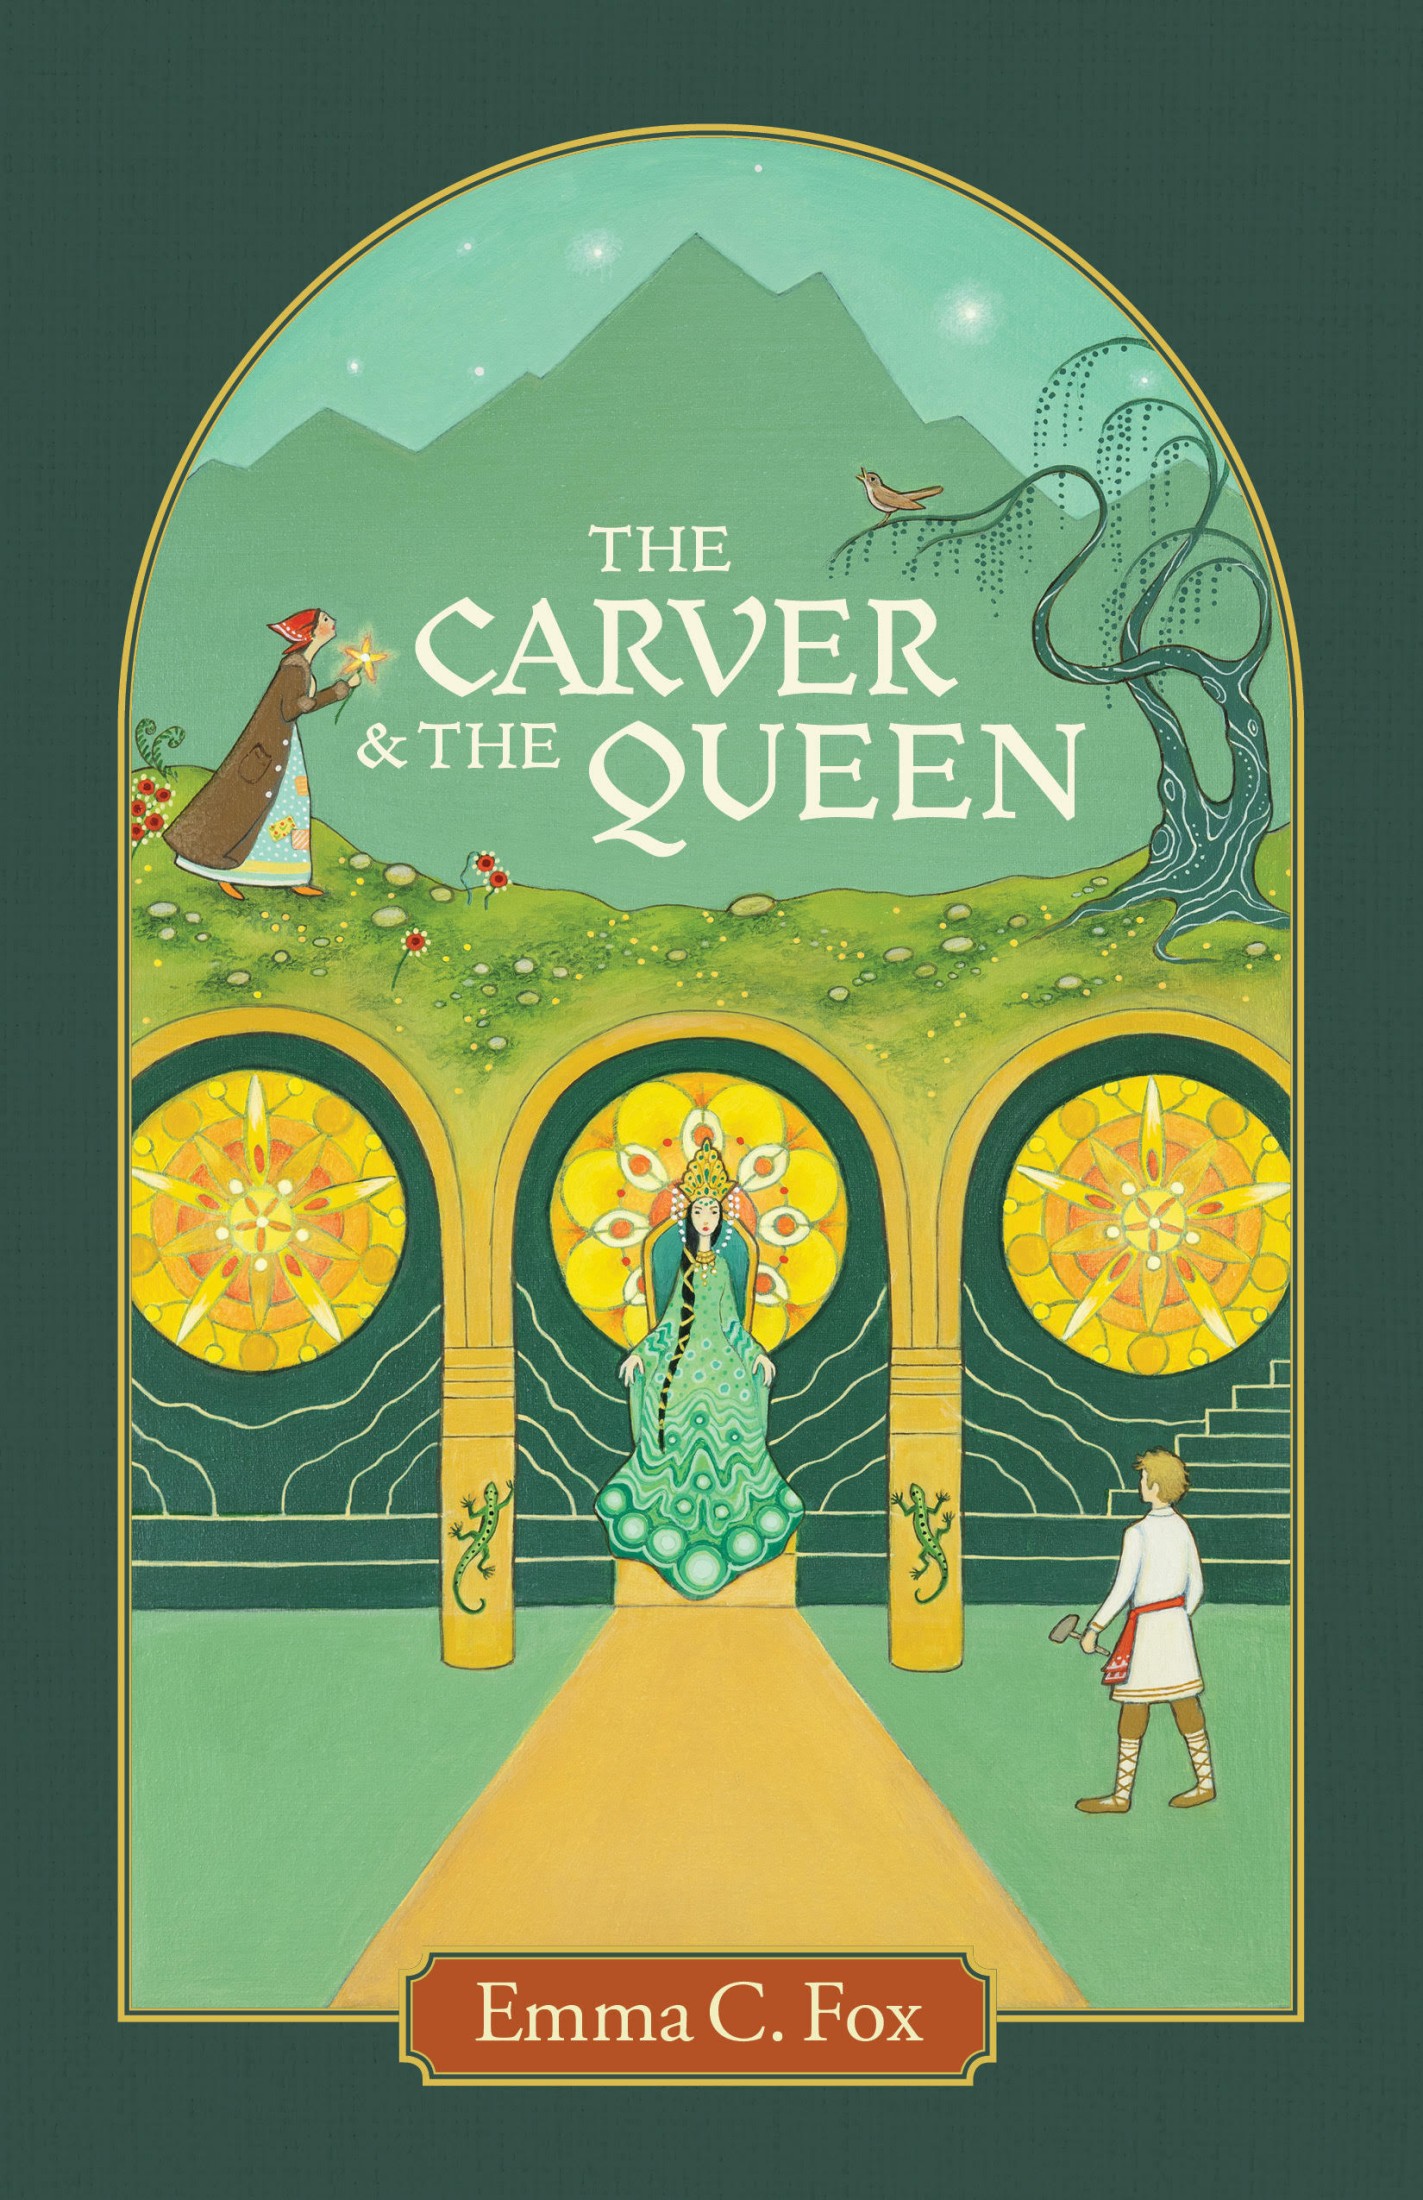 The Carver and the Queen – A Book Review